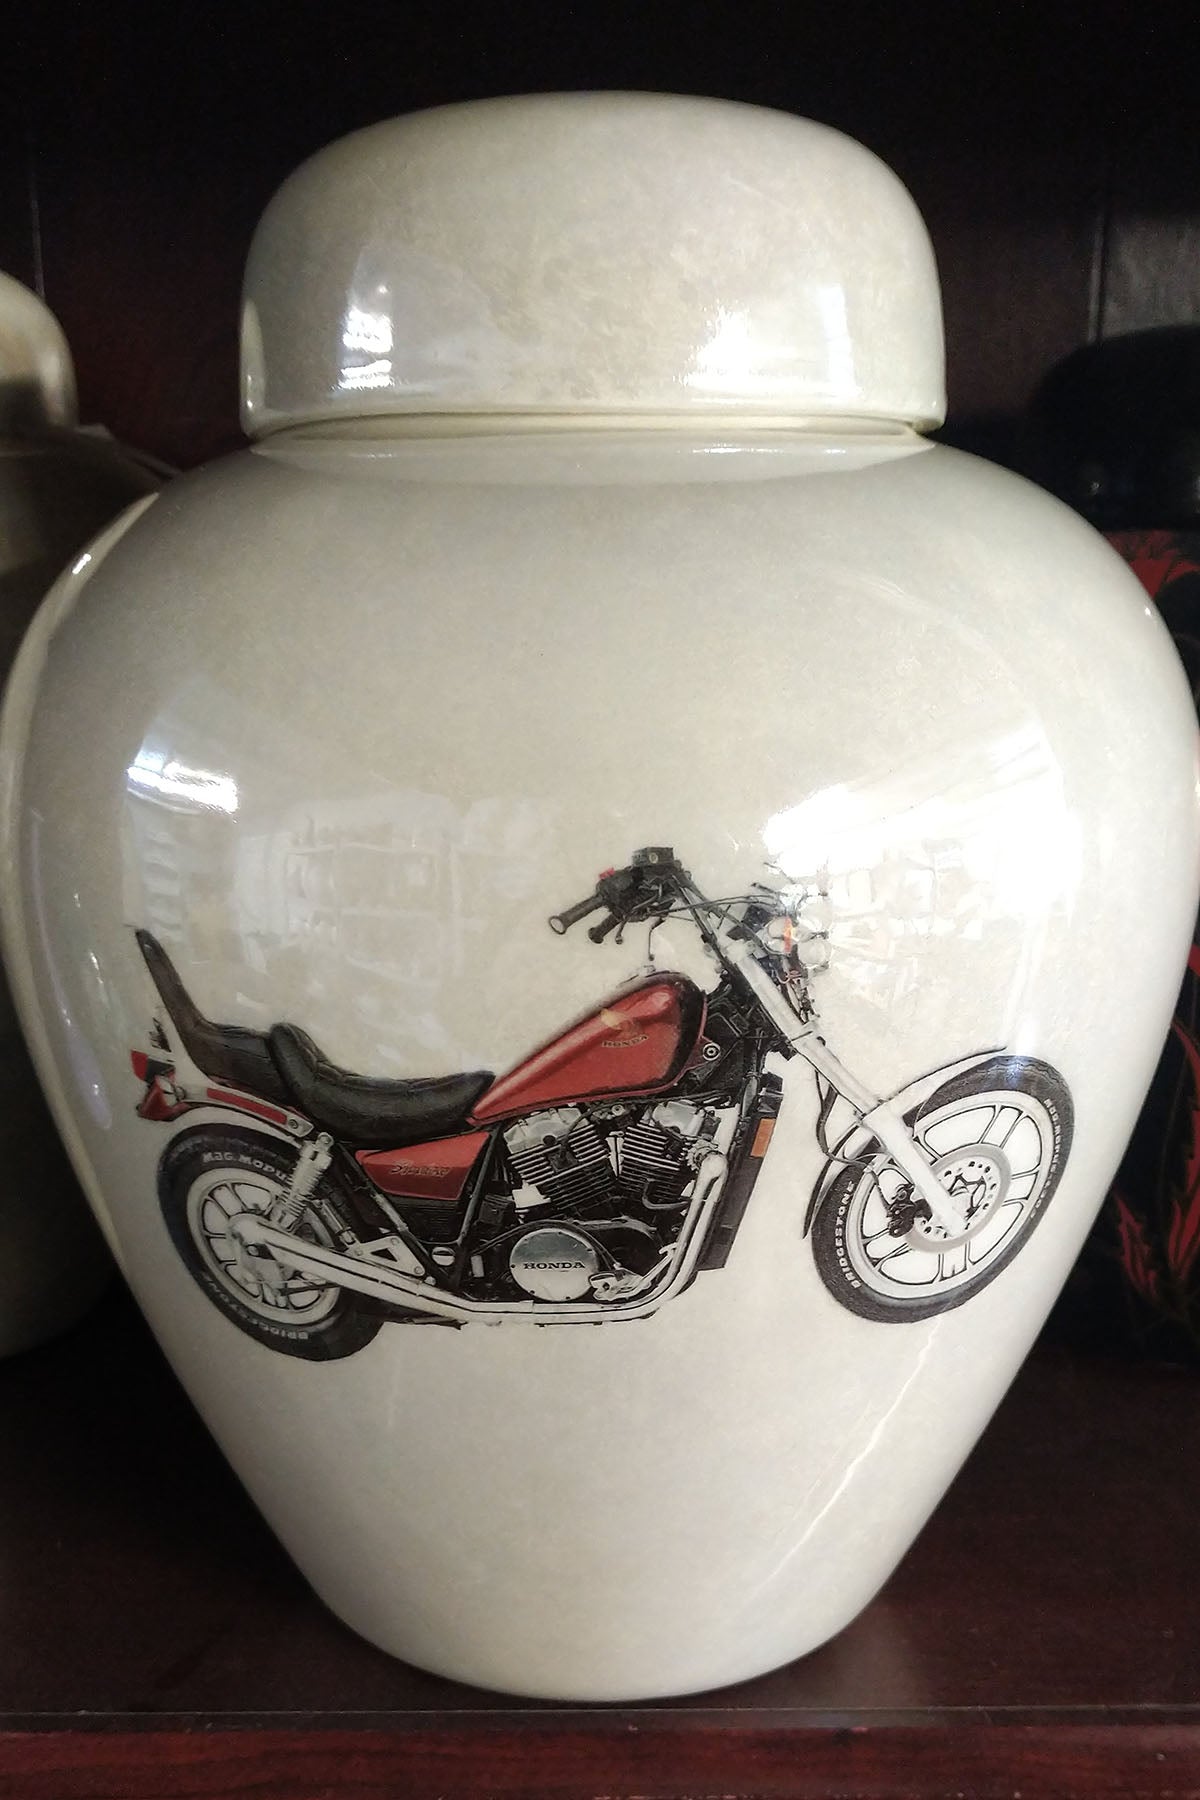 Personalize cremation urns | Heartland Urns and Keepsakes